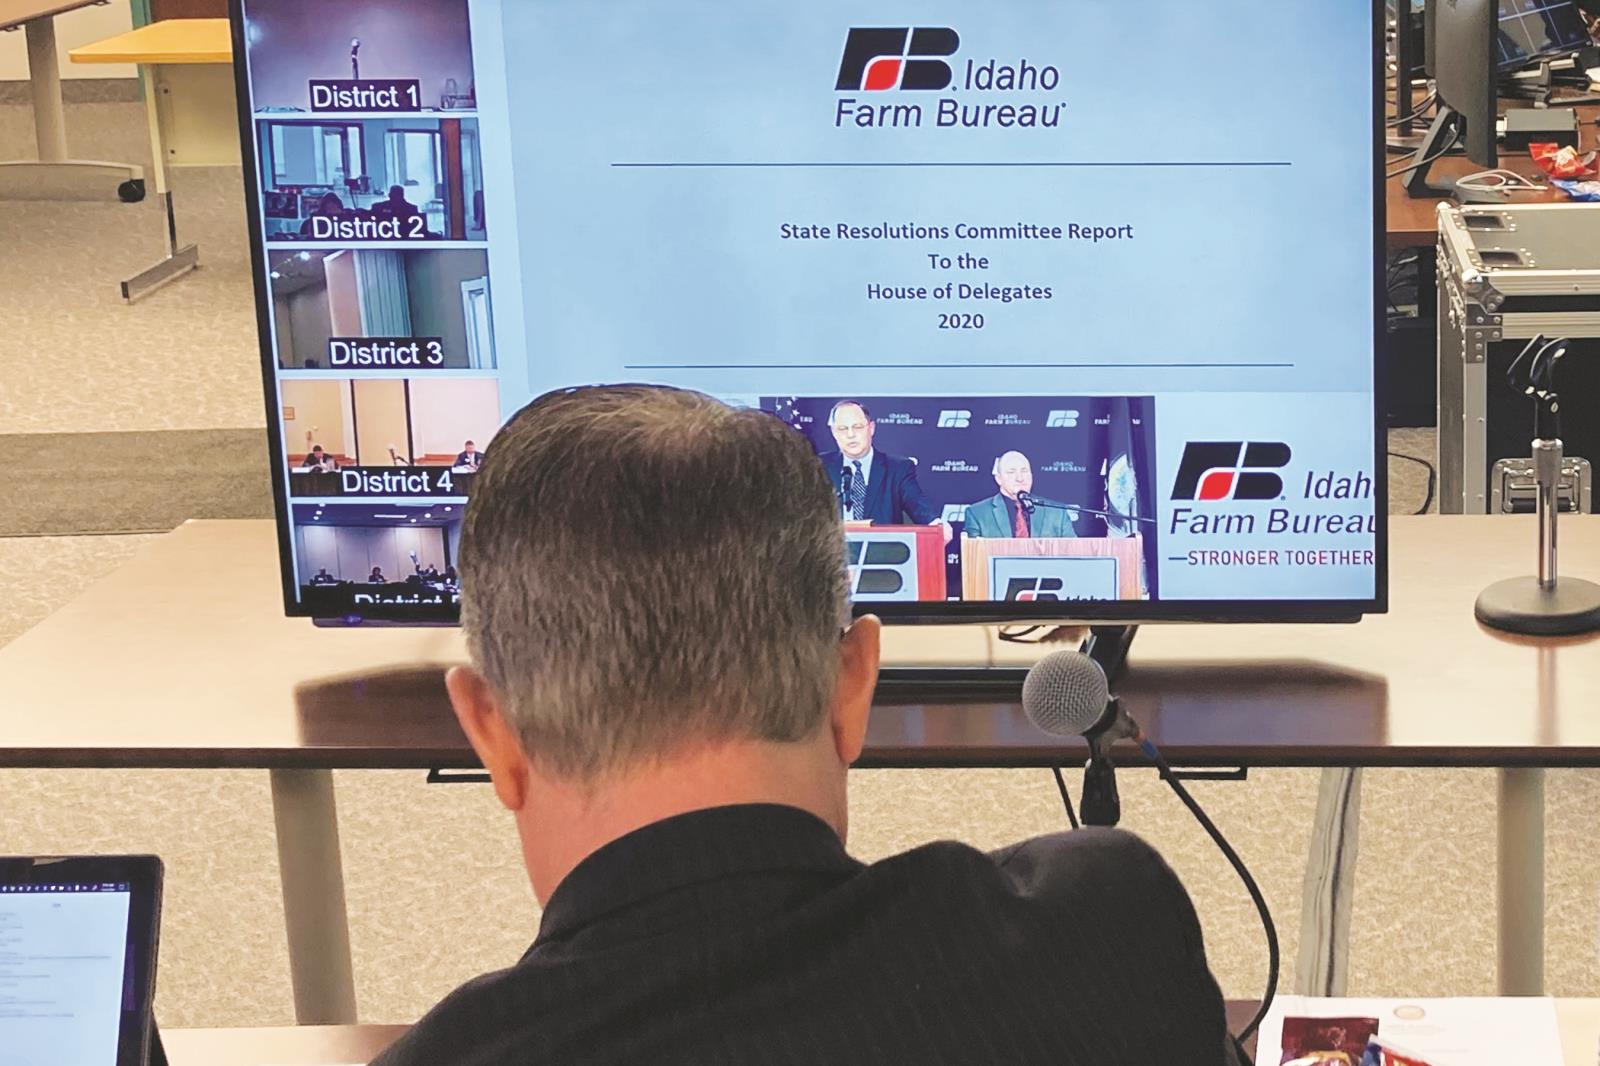 Idaho Farm Bureau Federation’s 81st annual meeting was held virtually this year. Sixty-one voting delegates from 36 counties participated in the meeting from six locations around the state.